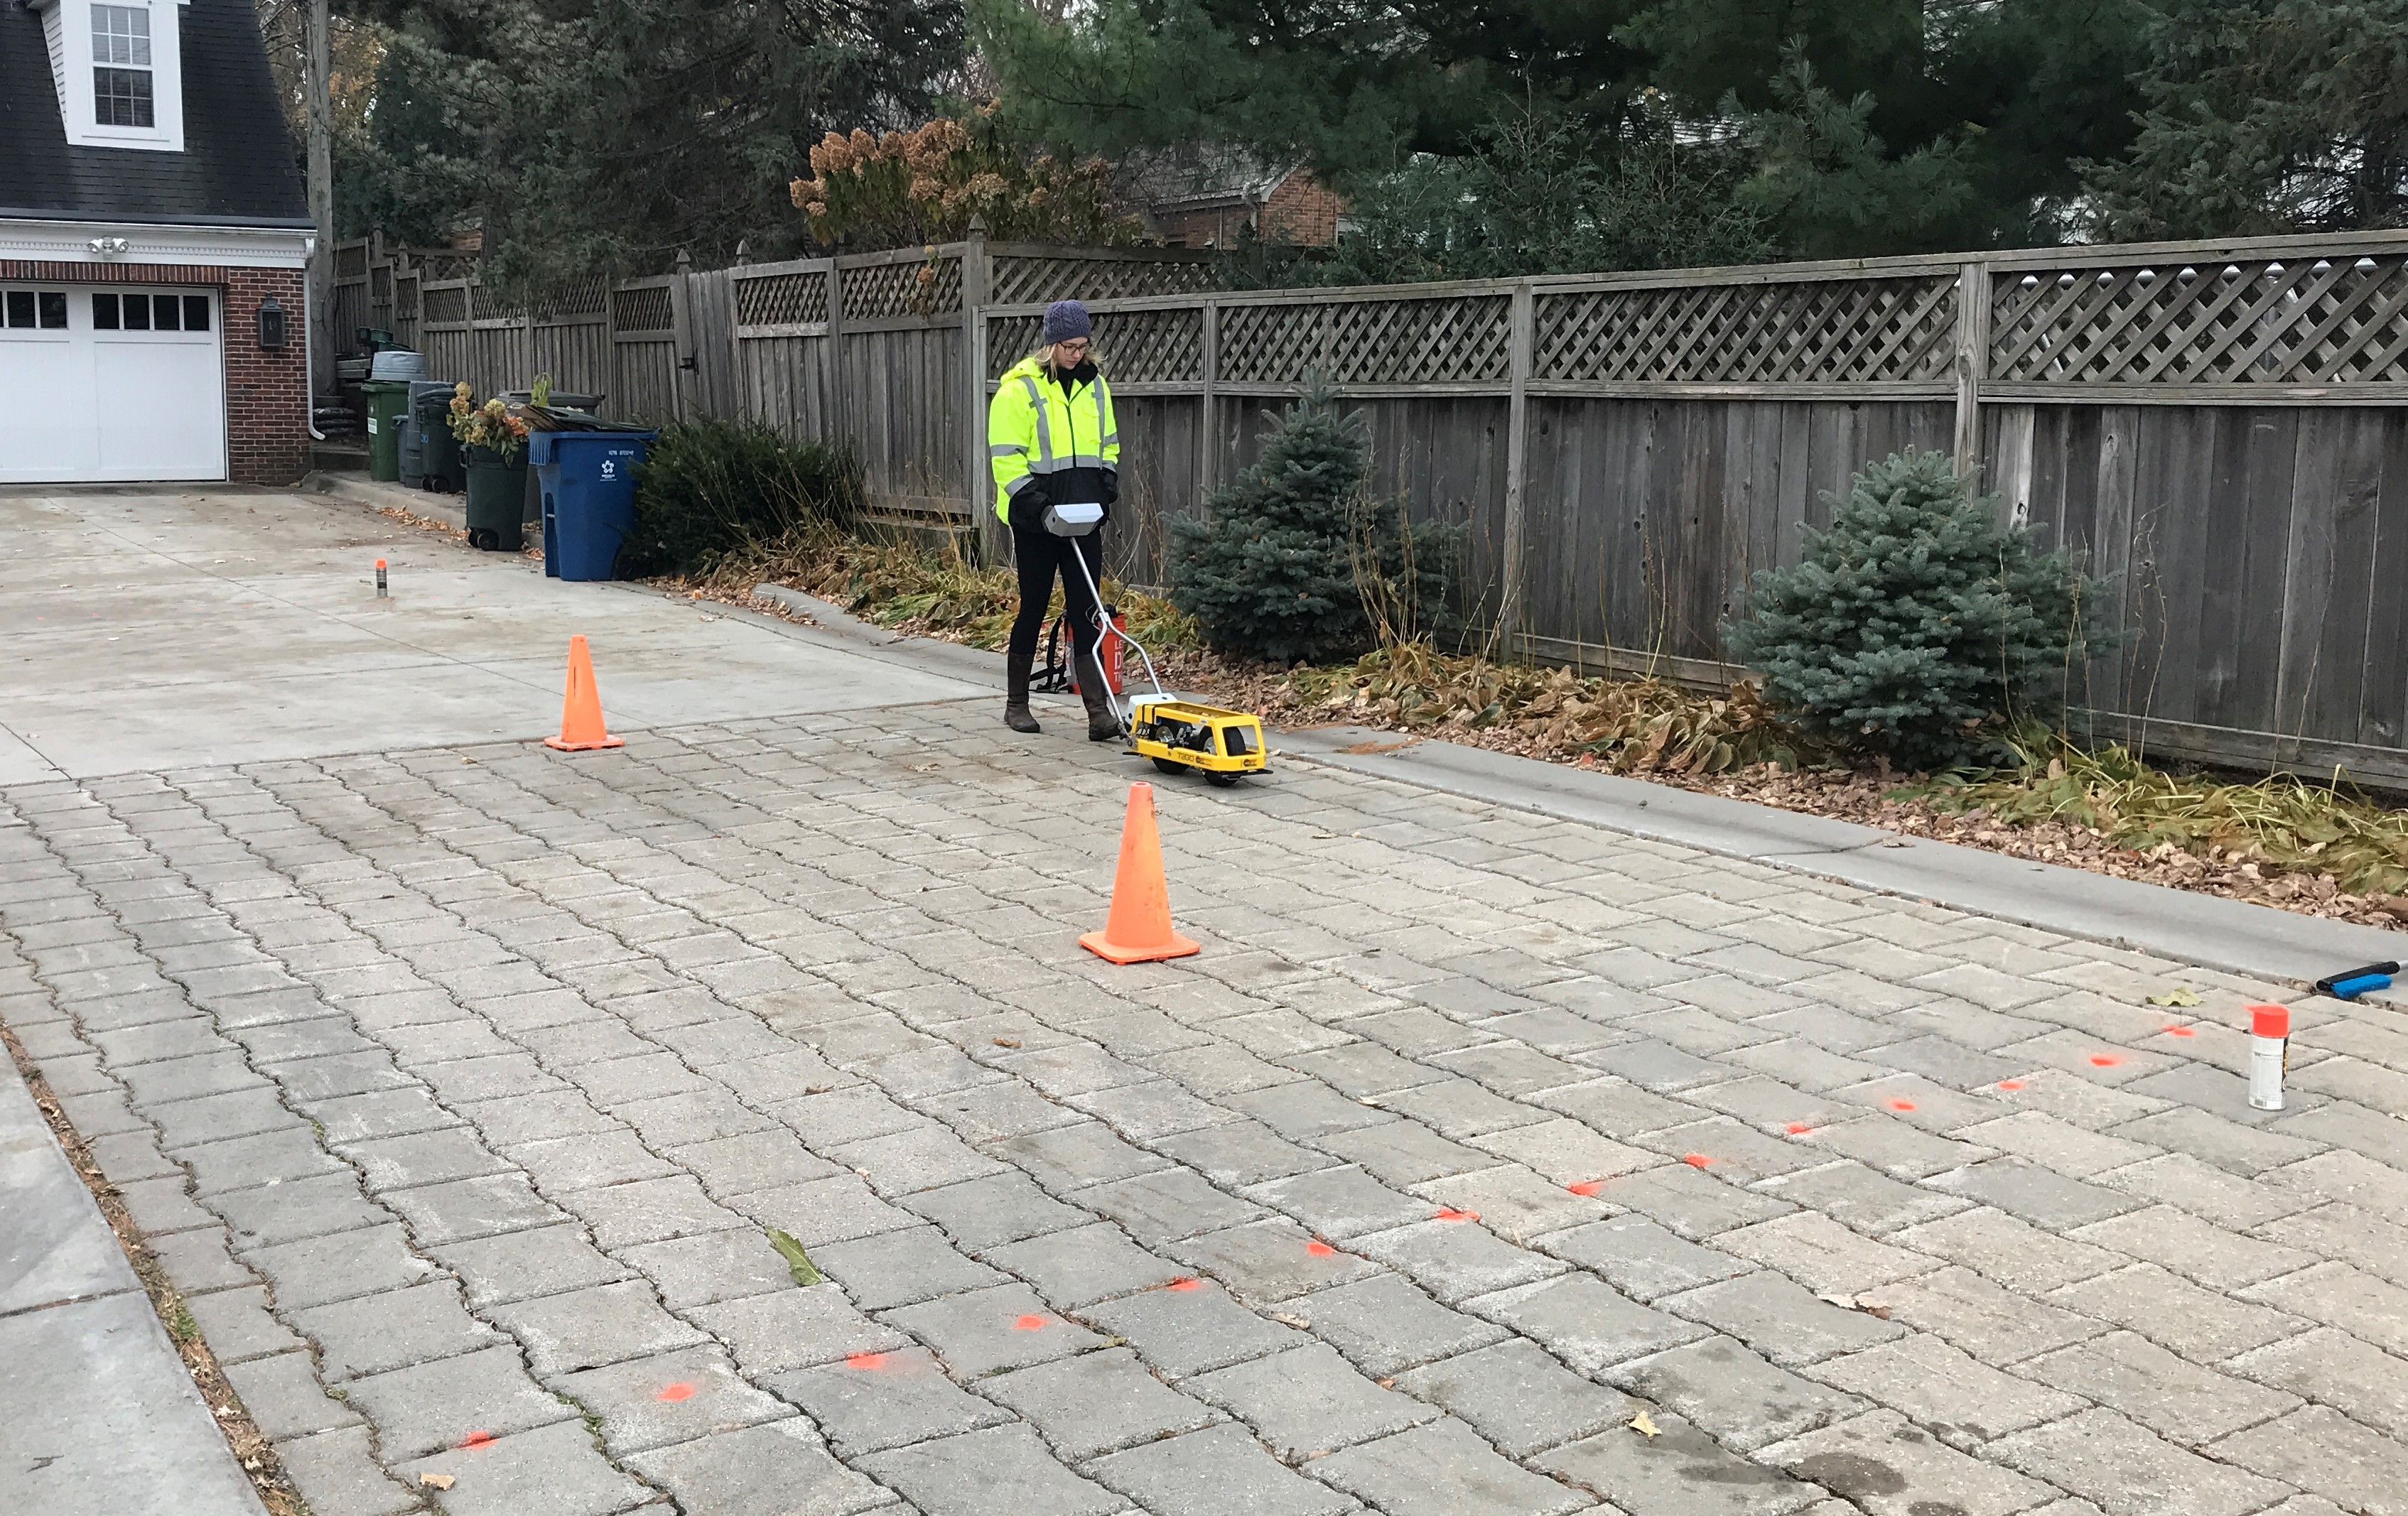 Katie Kemmitt collecting friction data on permeable pavement using a portable friction tester